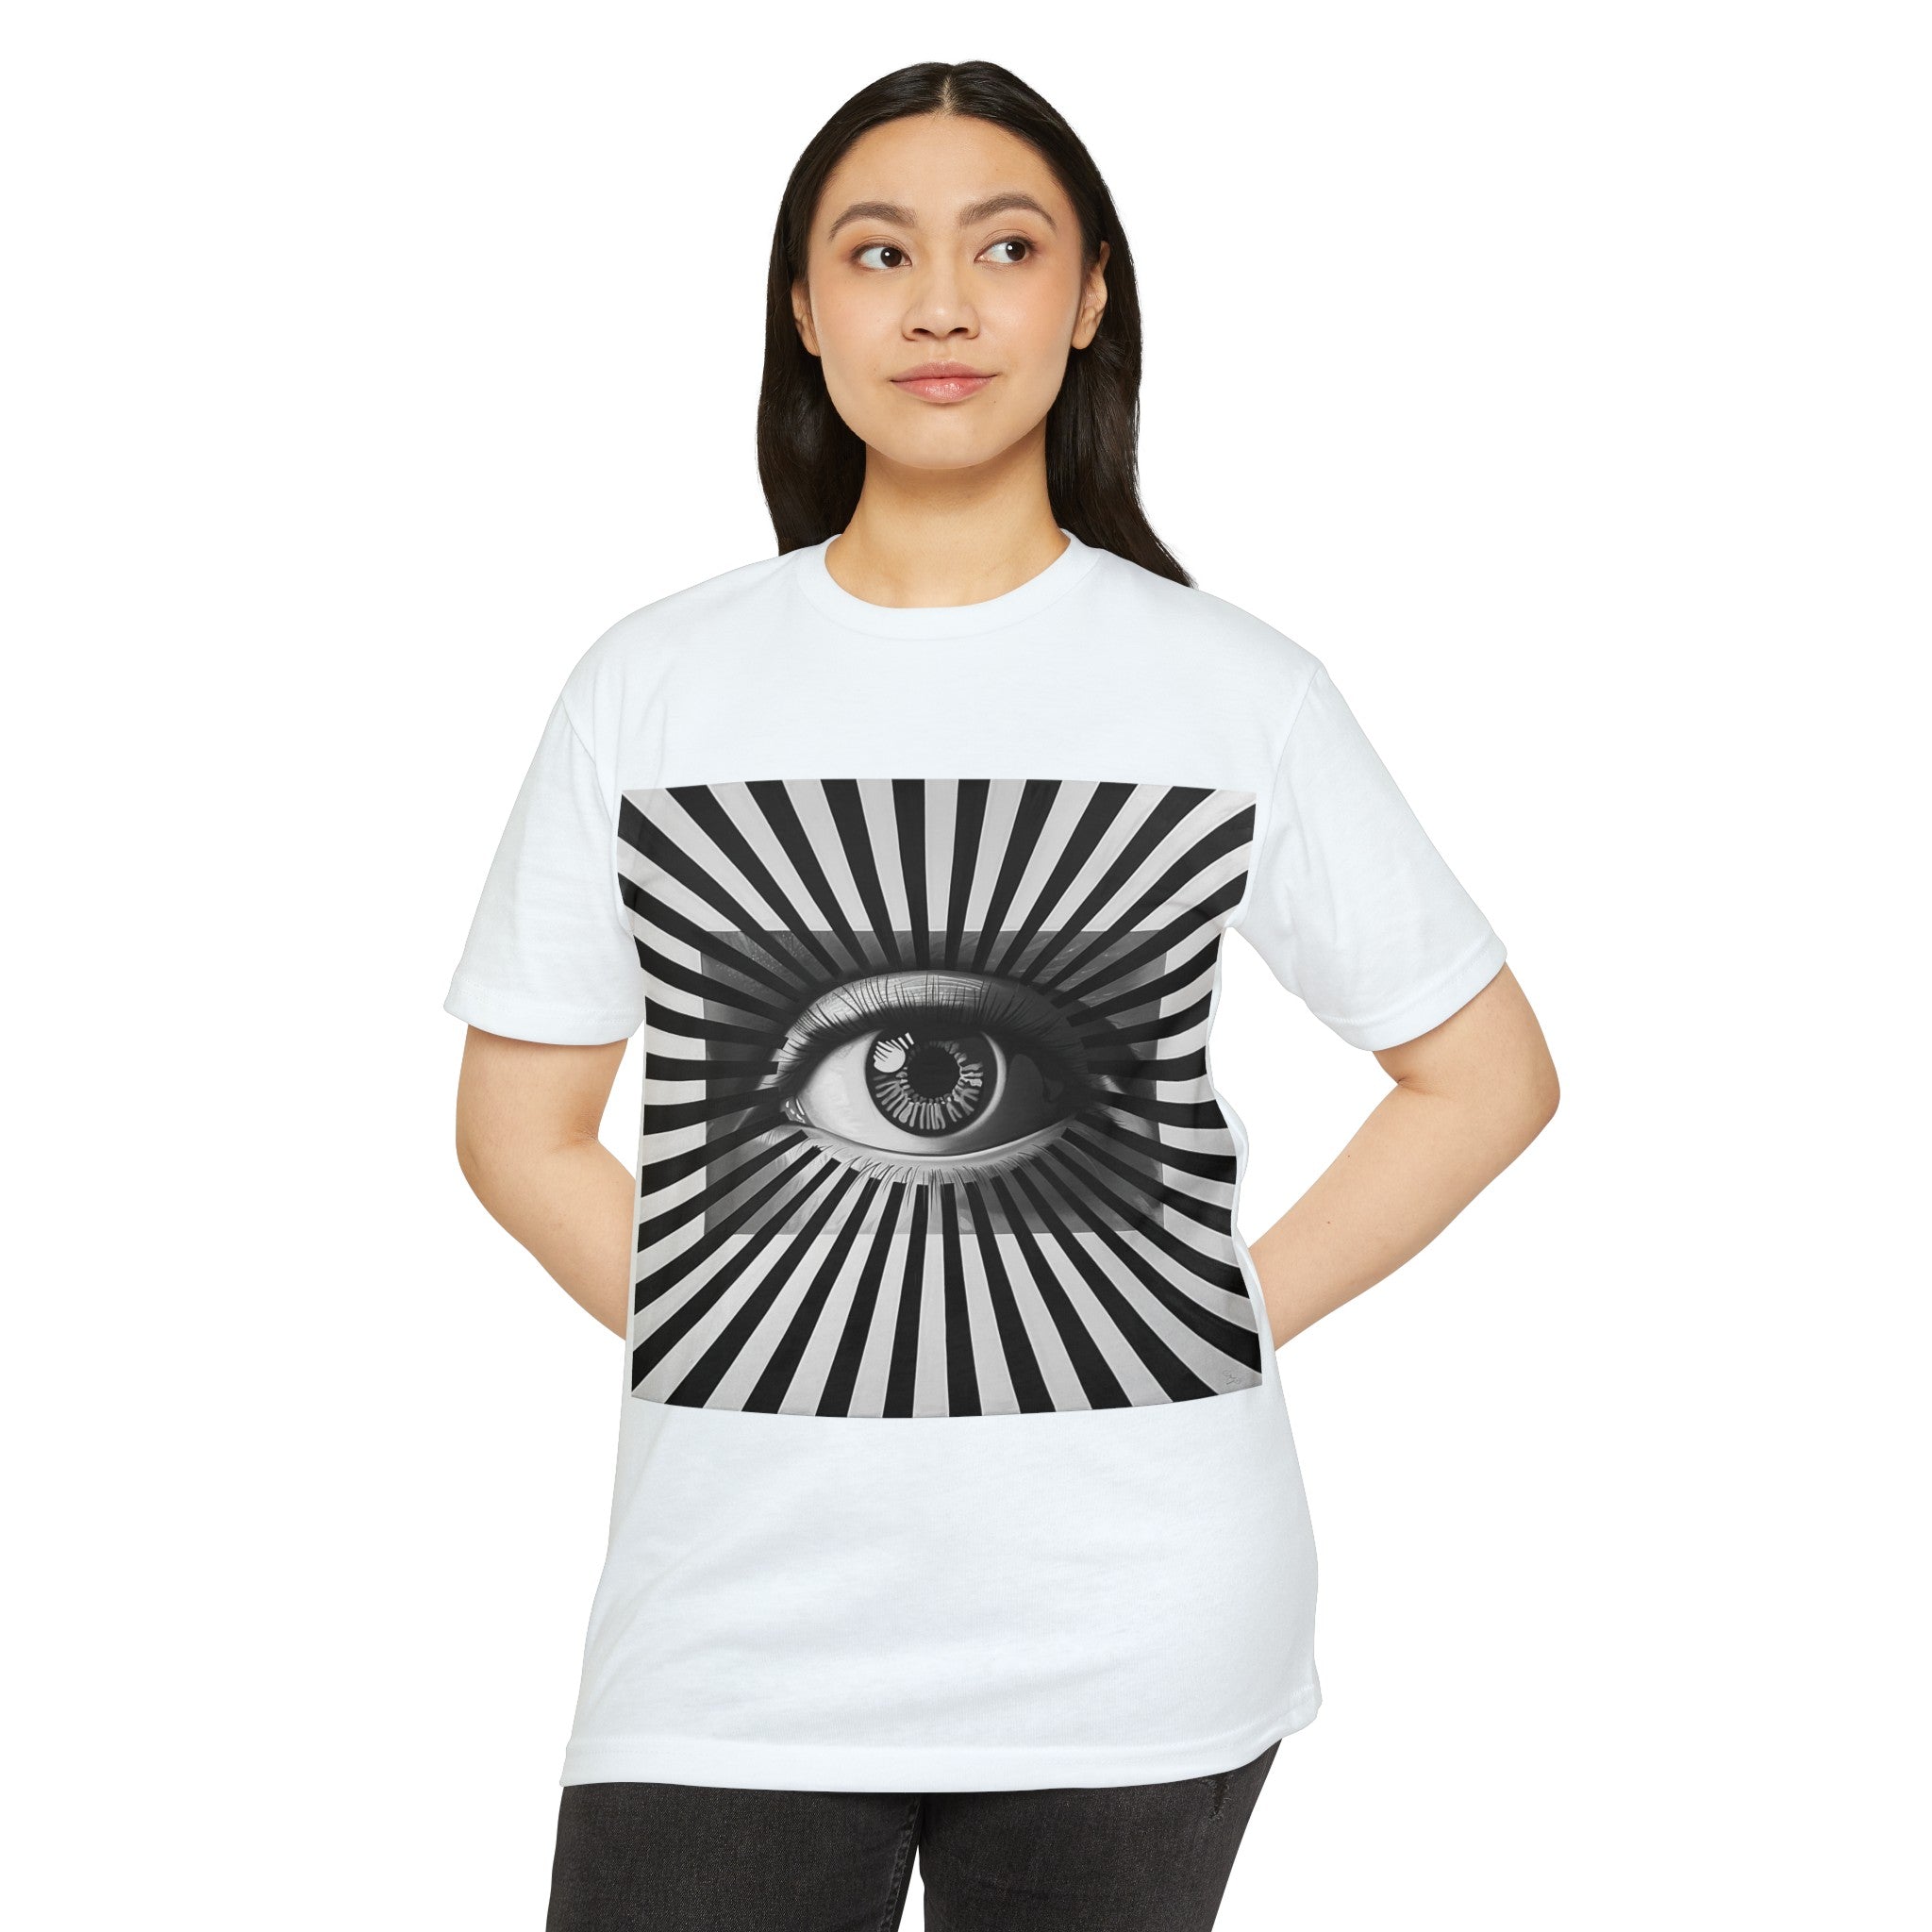 The image features a stylish unisex CVC jersey t-shirt, adorned with a captivating optical illusion eyeball design. The detailed and dynamic graphic appears to change and move, playing tricks on the eye. The tee’s soft, comfortable fabric and modern fit are also highlighted, making it an ideal choice for anyone who appreciates unique and artistic fashion.